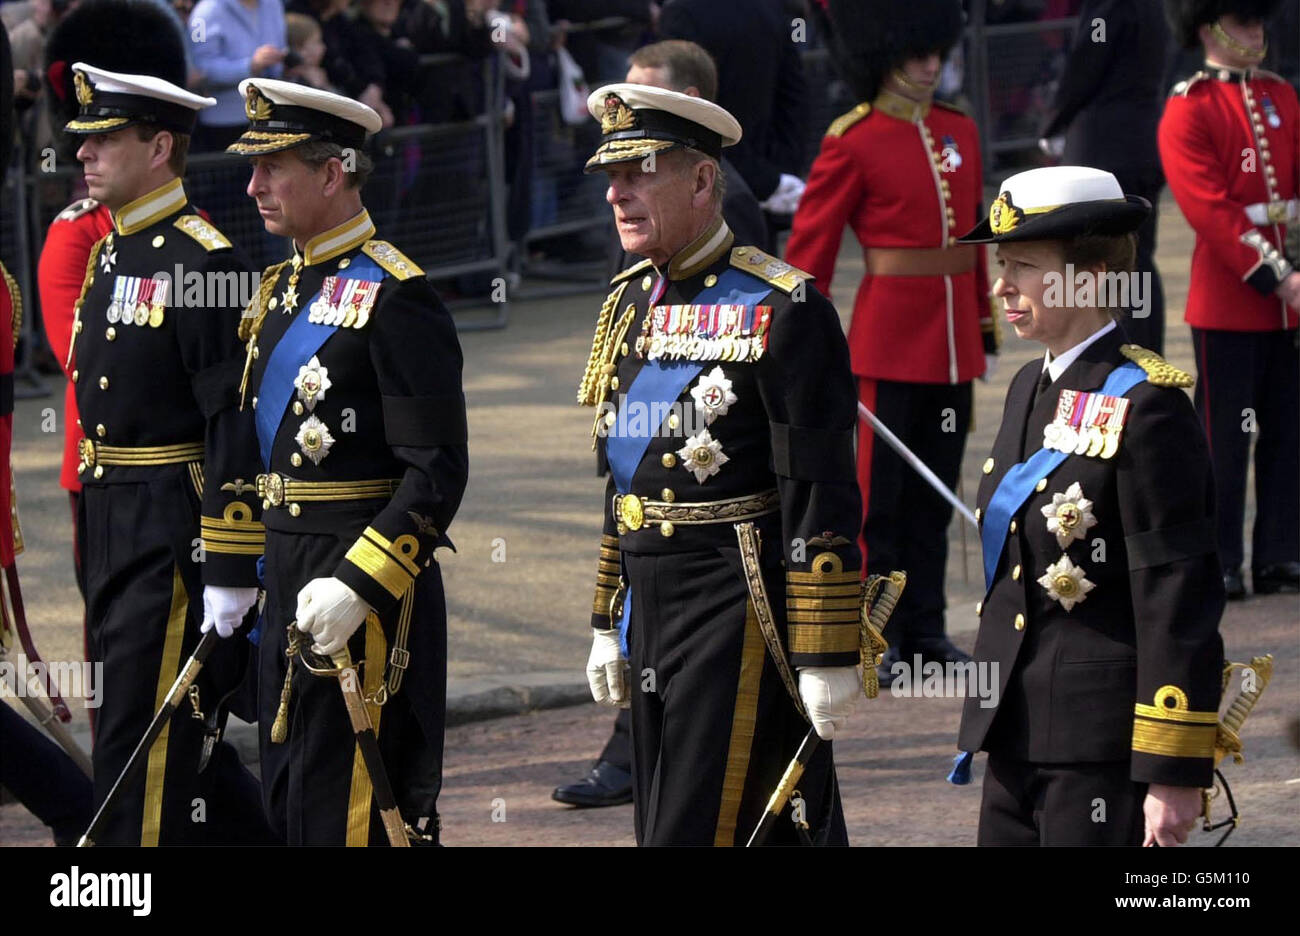 The royal entourage (left-right) The Duke of York, The Prince of Wales, The Duke of Edinburgh and The Princess Royal following the coffin of the Her Majesty Queen Elizebeth the Queen Mother in procession from the Queens Chapel, * St. James Palace to Westminster Hall as it passes in to Horseguards Parade. Stock Photo